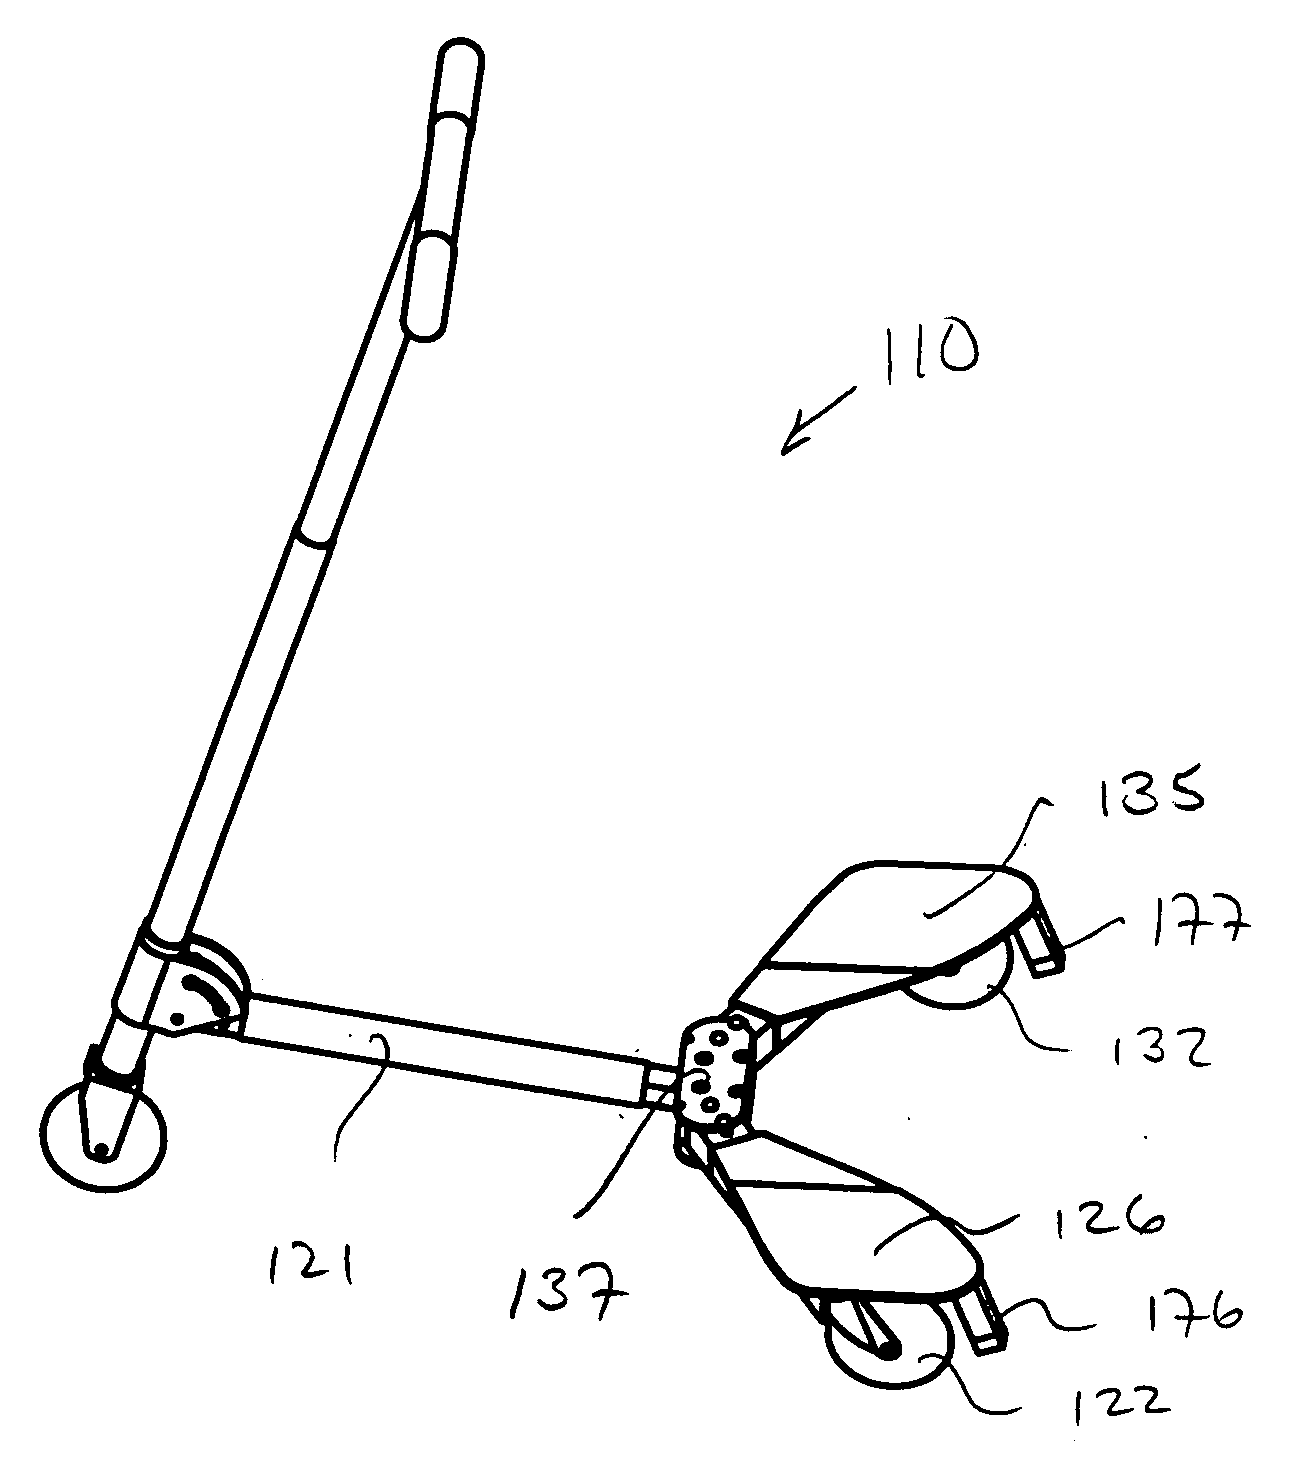 Side movement propelled scooter device having expanded foot platform